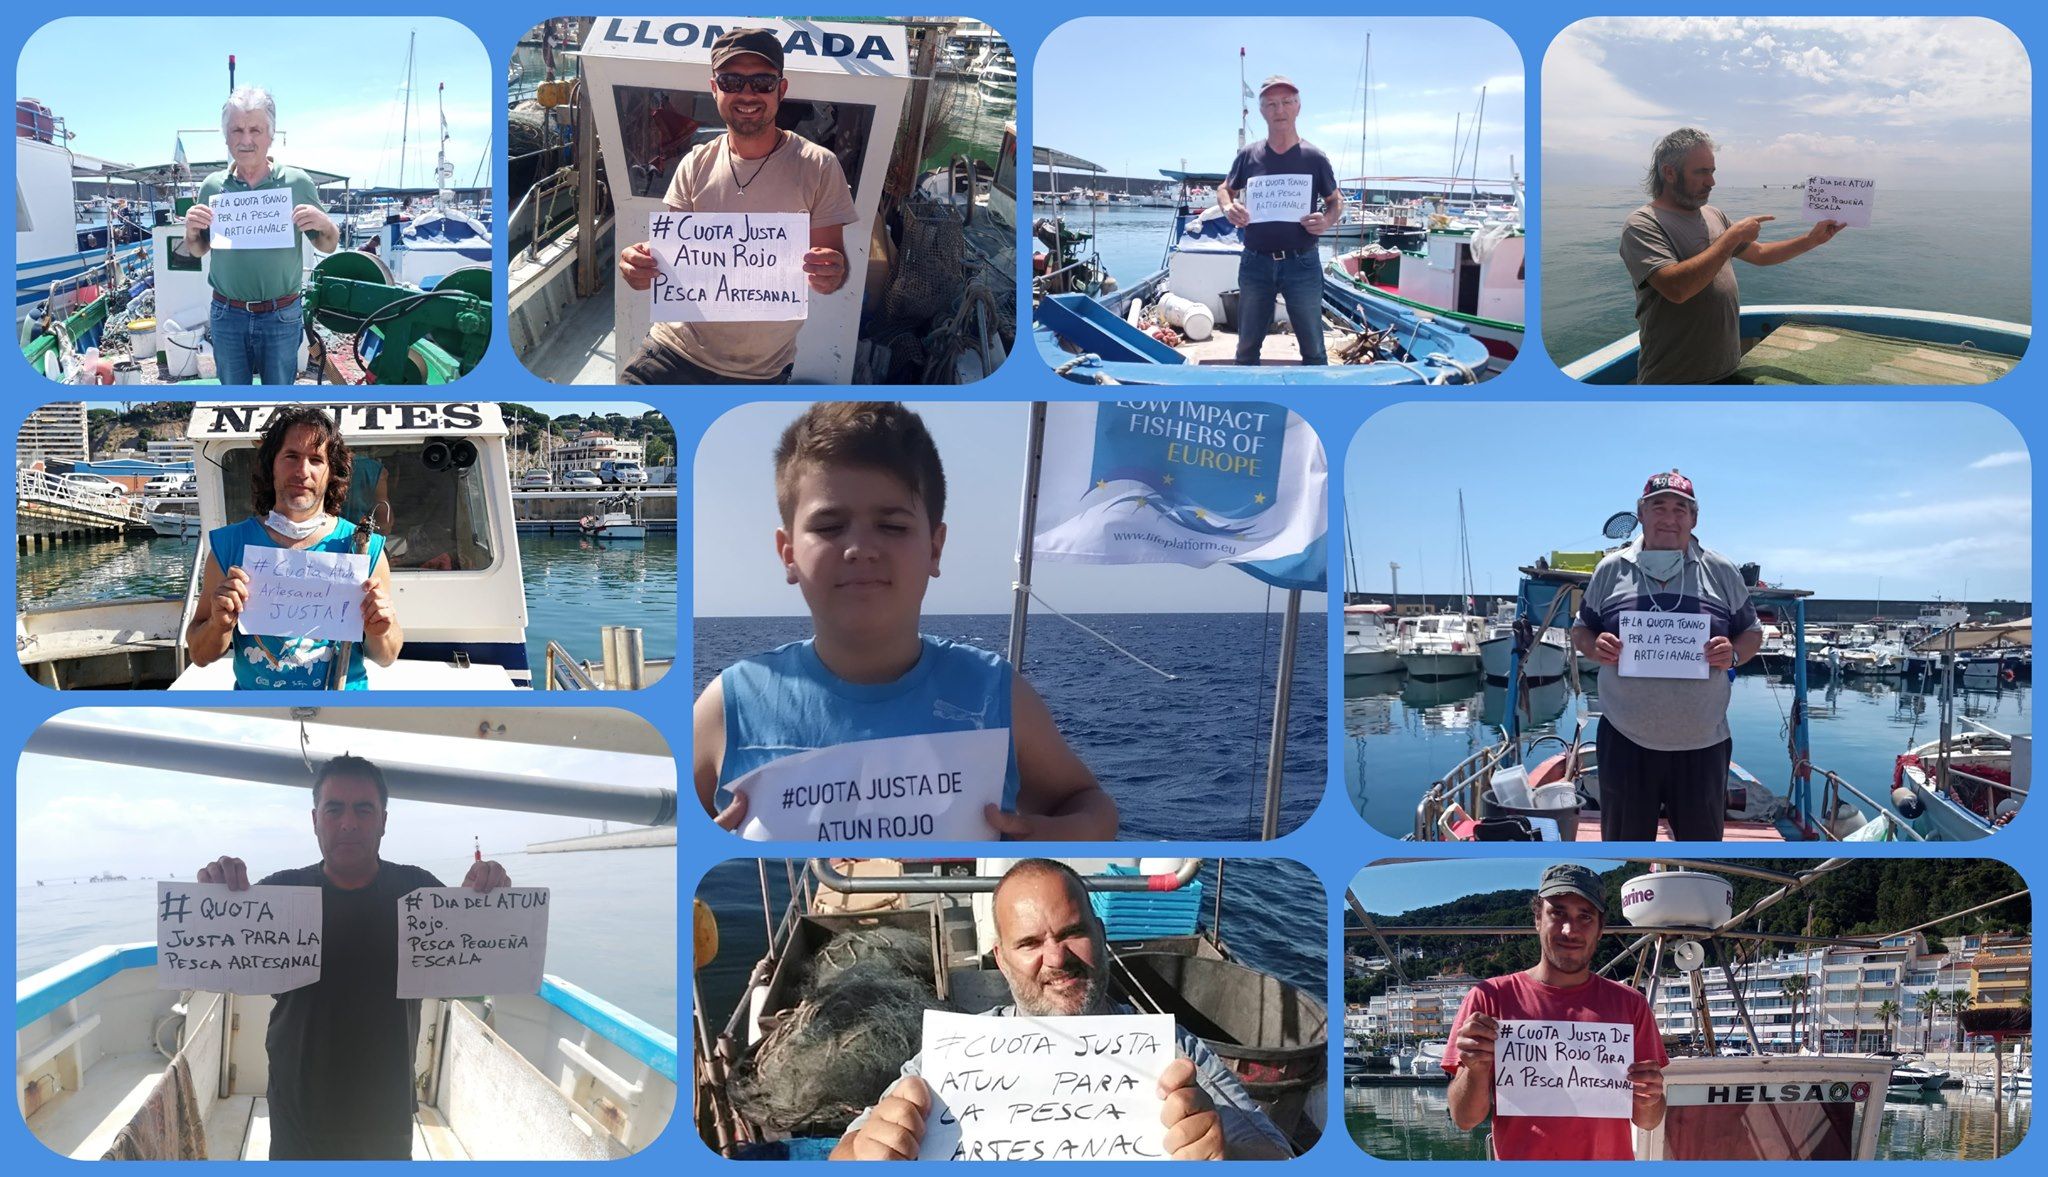 Press Release – Enough is enough! French small-scale fishers call for action against supertrawler impunity. Demonstrations in Concarneau planned for 25 September